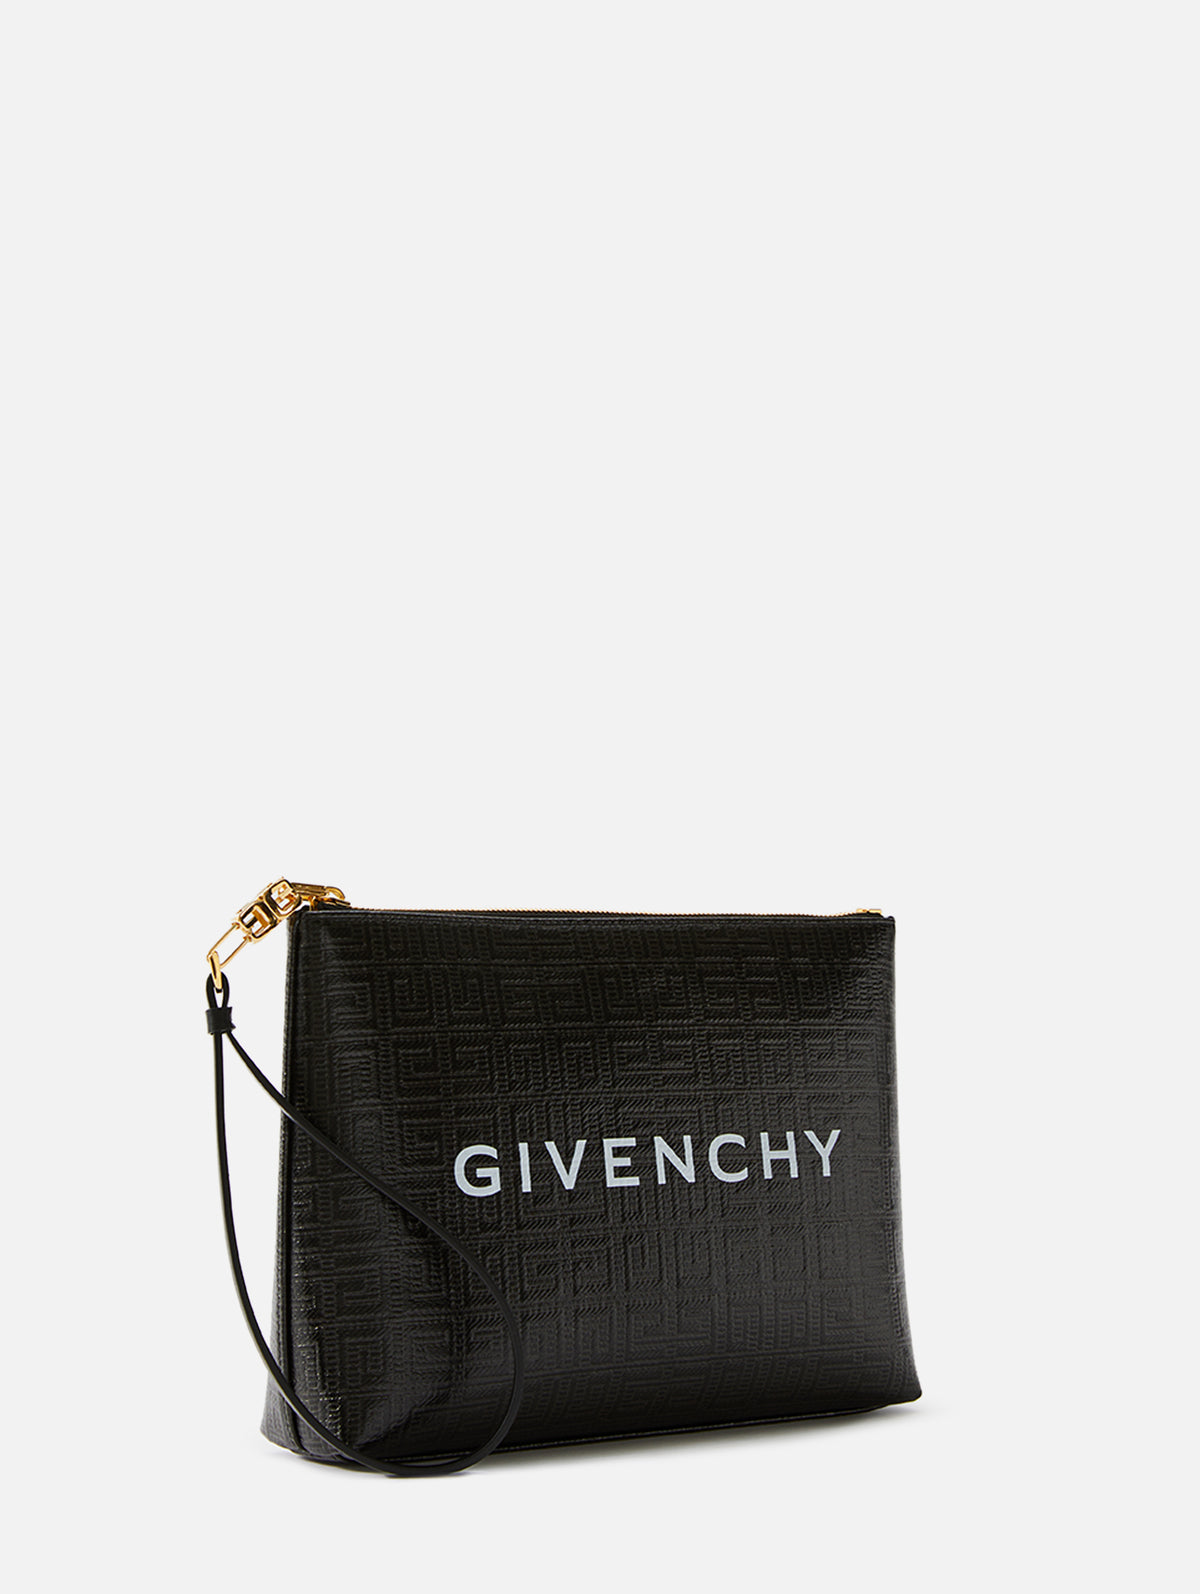 LARGE POUCH | GIVENCHY | ELYSEWALKER